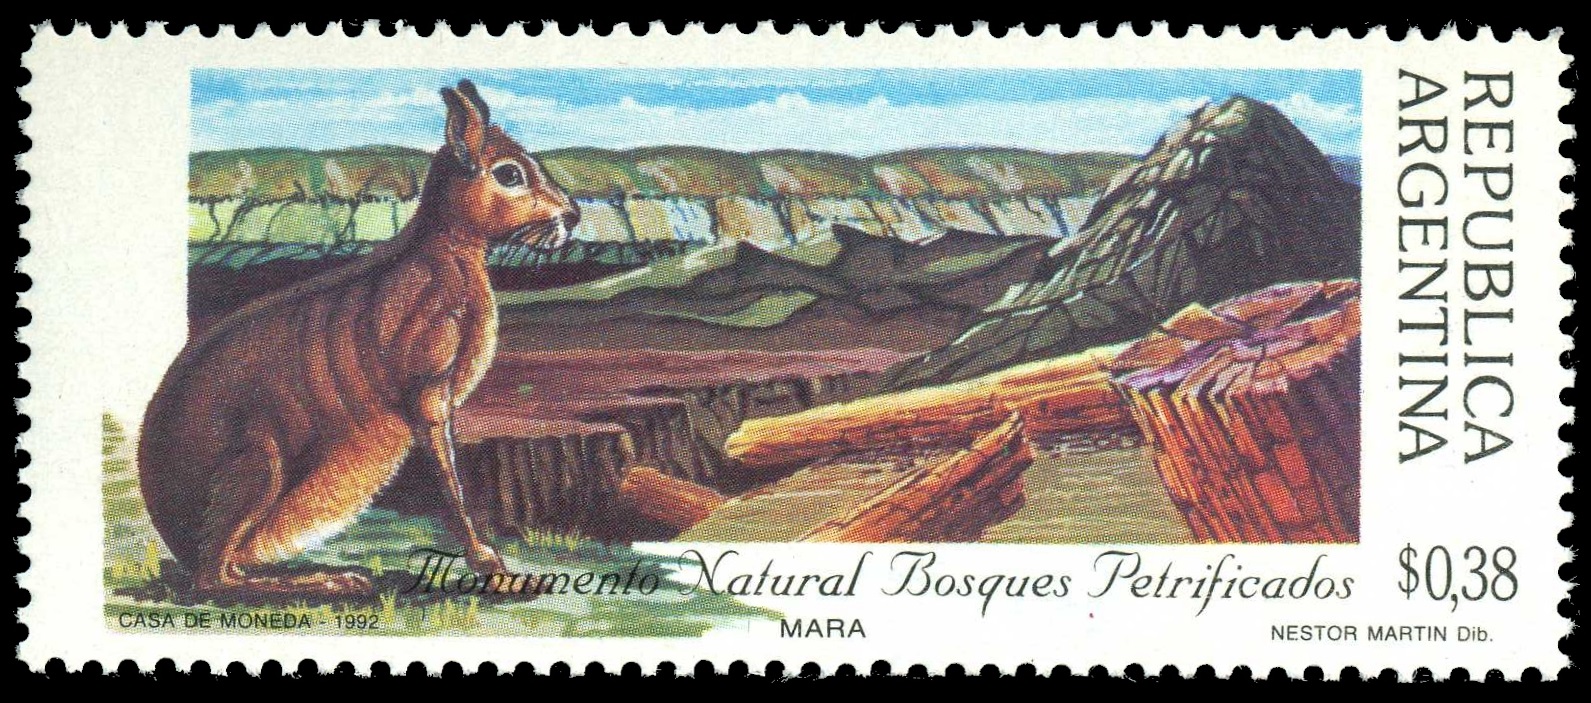 Landscape of the Monumento natural Bosques Petrificados on stamp of Argentina 1992